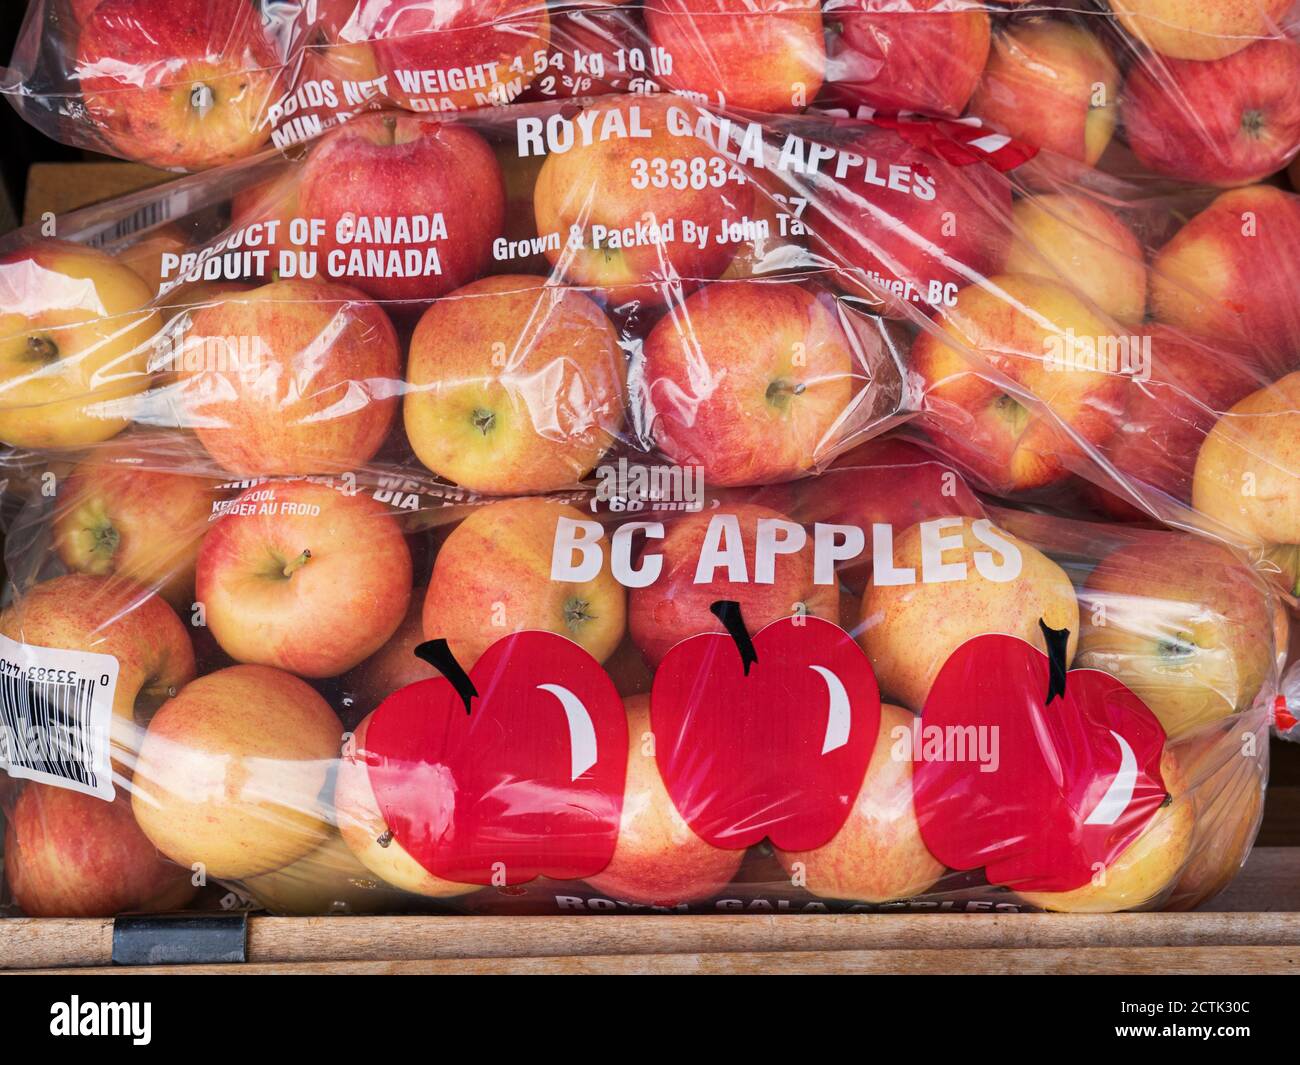 https://c8.alamy.com/comp/2CTK30C/use-of-plastic-in-packaging-by-the-agriculture-and-food-industries-royal-gala-apples-for-sale-in-plastic-bags-2CTK30C.jpg